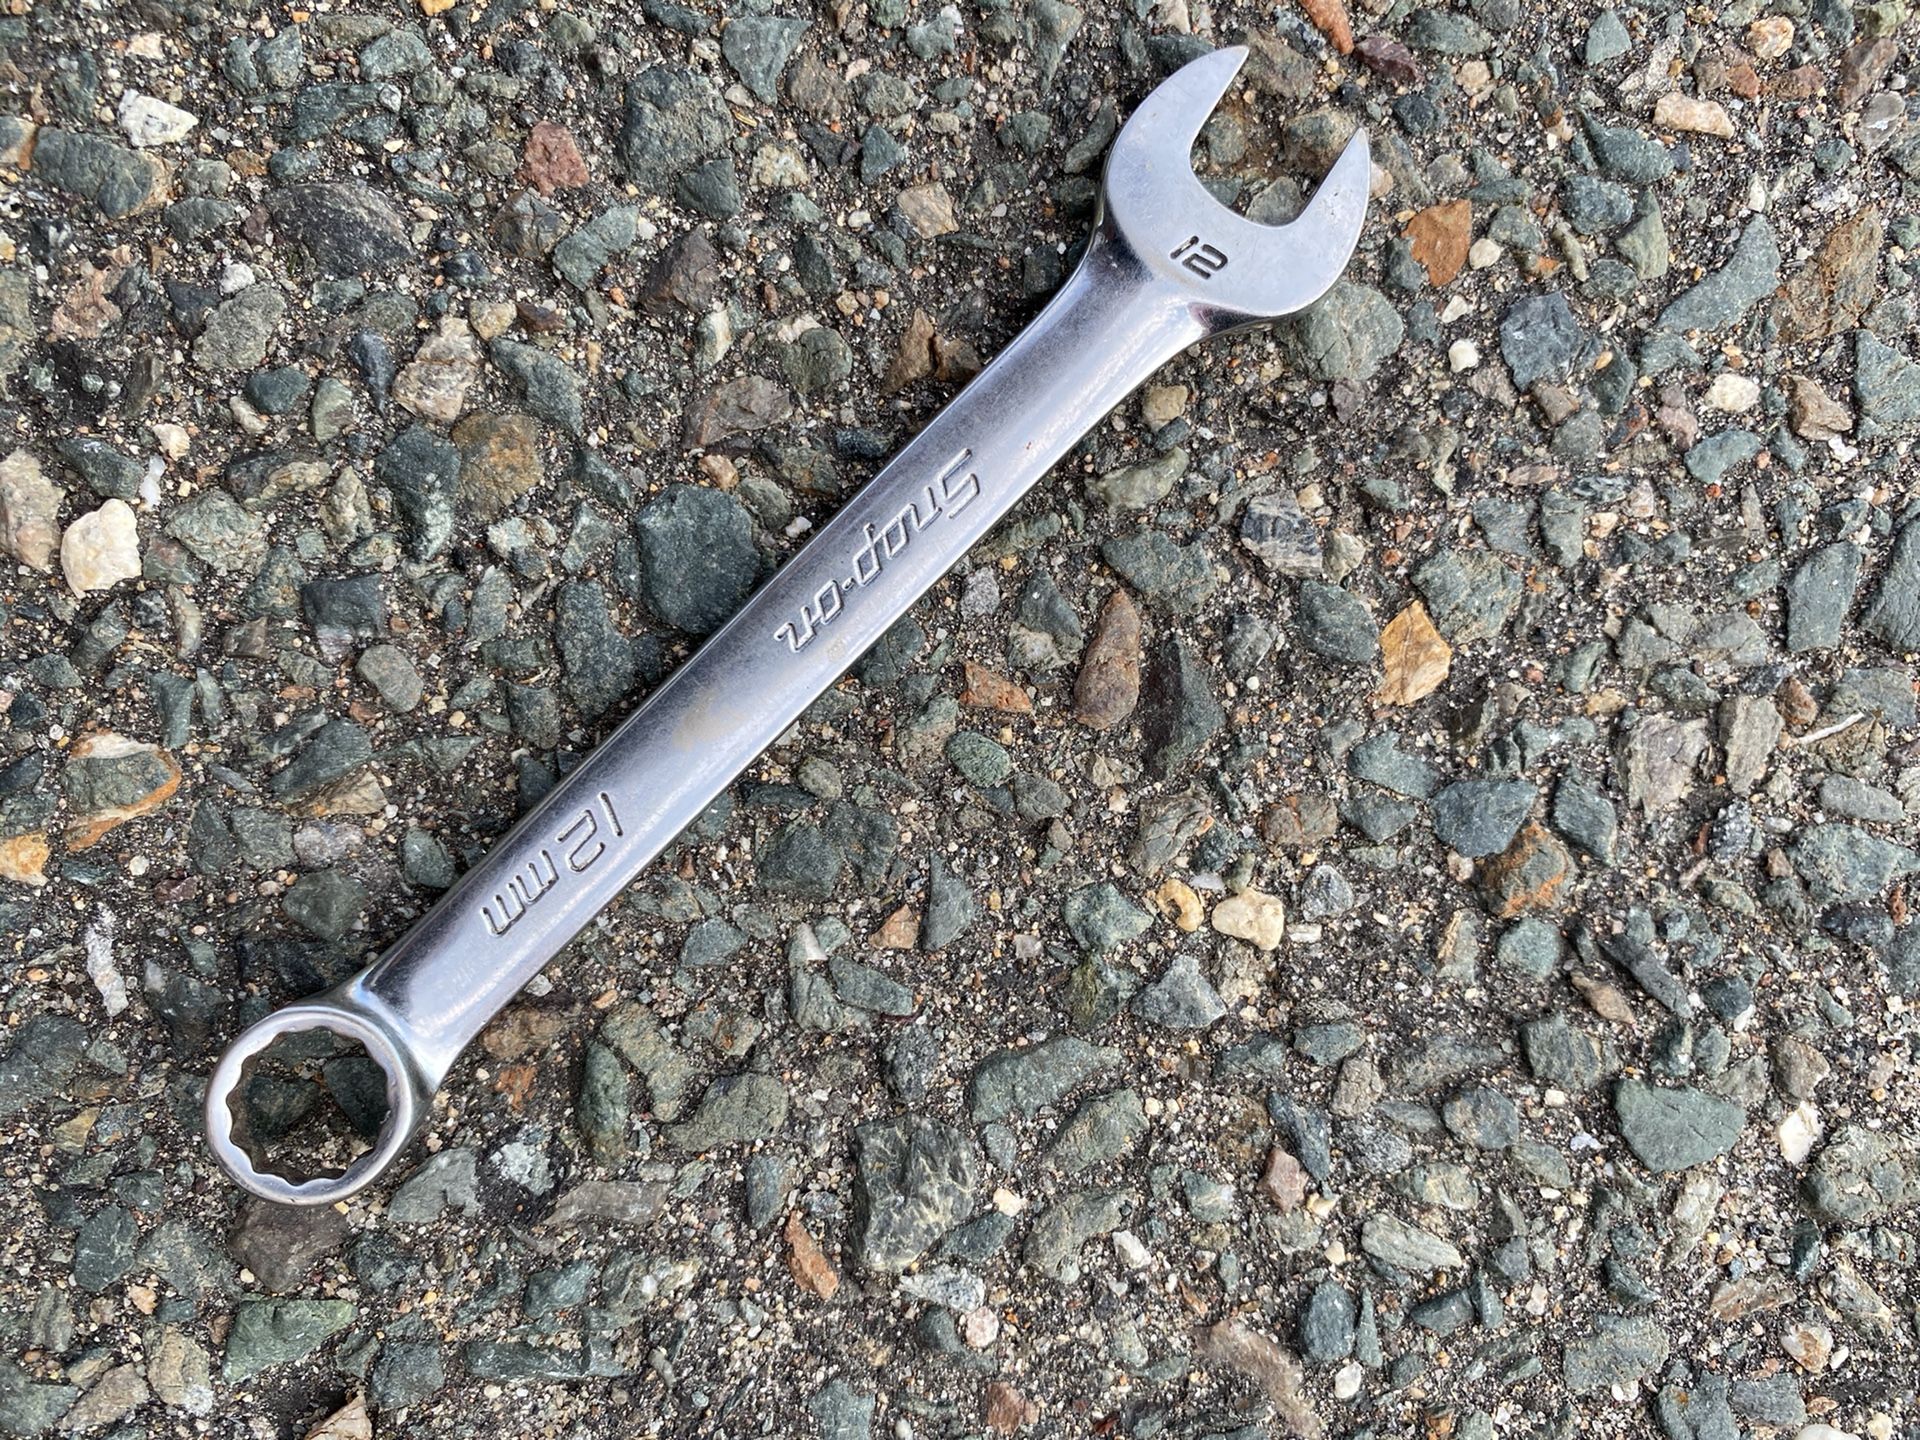 Snap on tool wrench